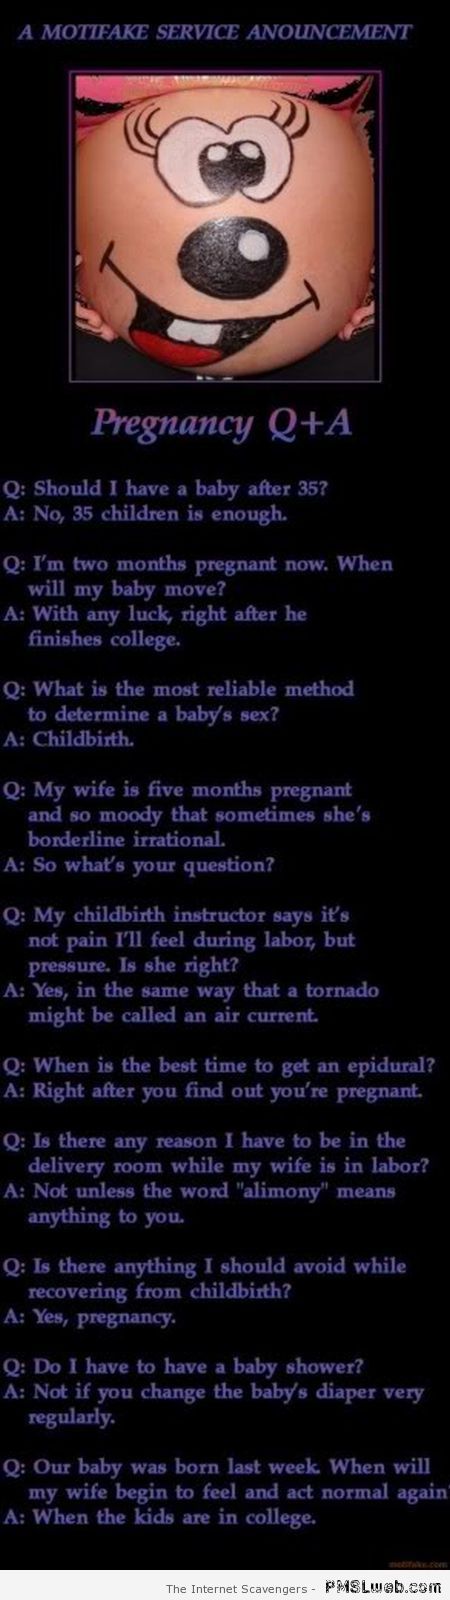 Funny pregnancy questions and answers at PMSLweb.com